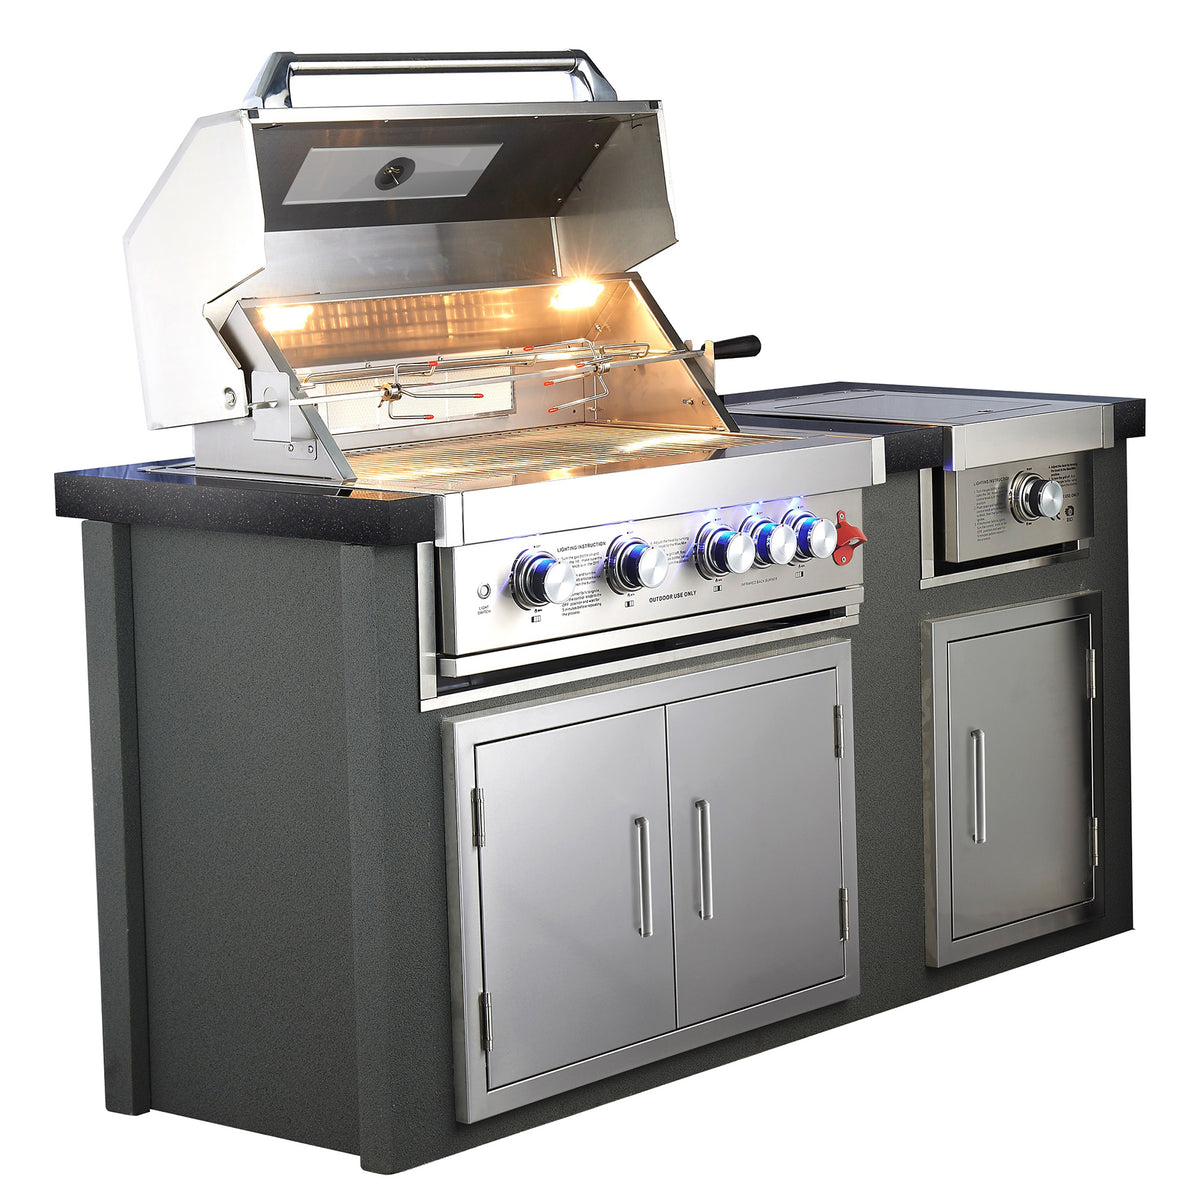 Draco Grills Avalon Stainless Steel Outdoor Kitchen with 4 Burner Barbecue and Side Burner